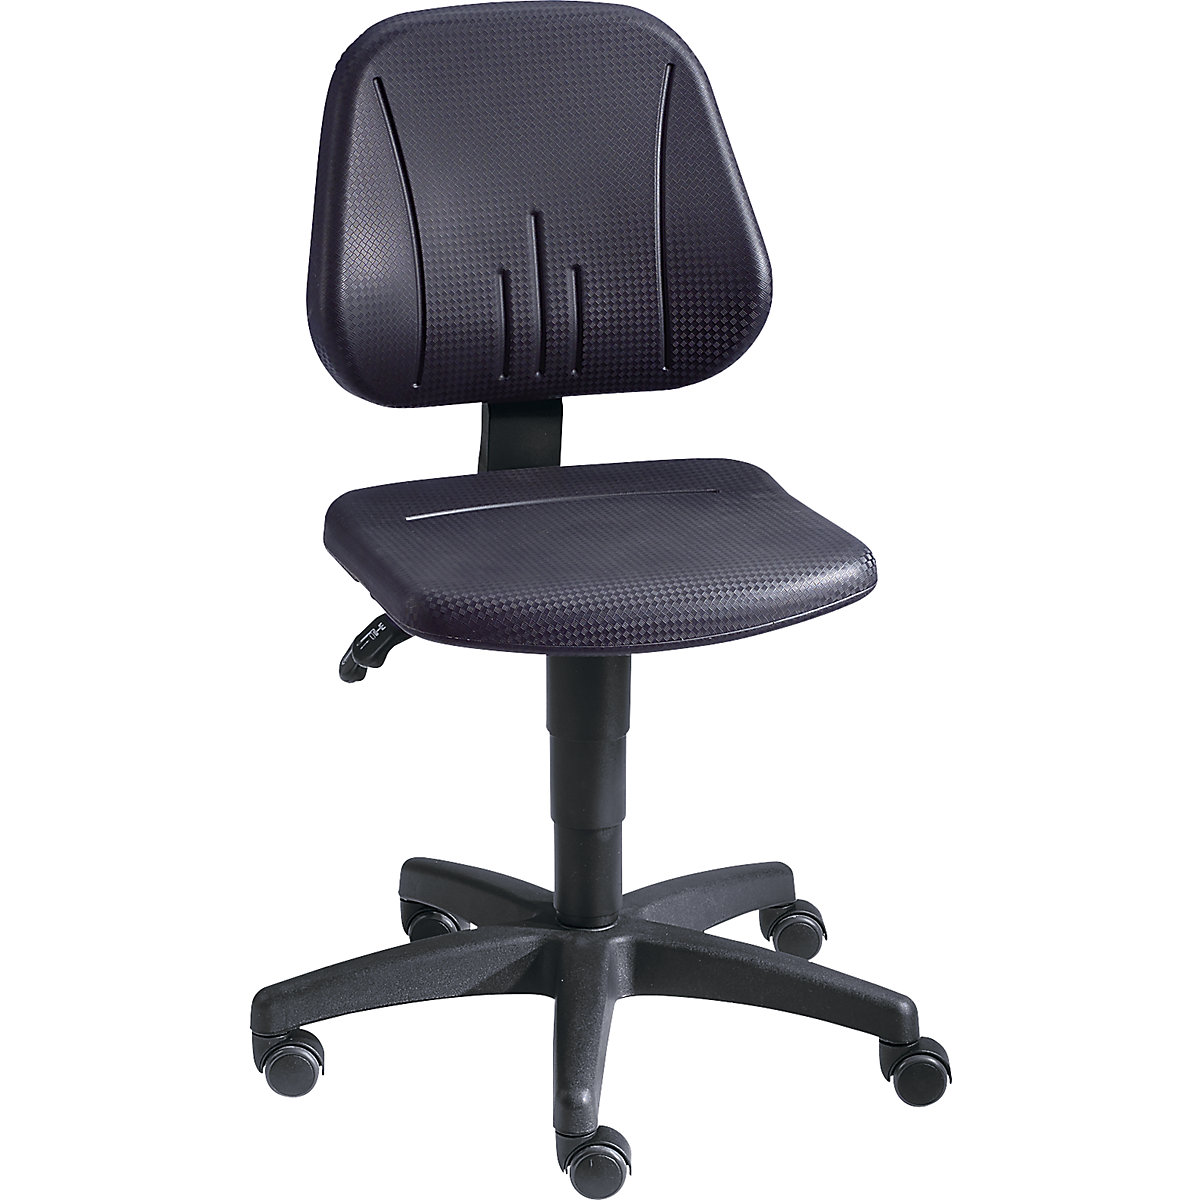 Industrial swivel chair – bimos, with gas lift height adjustment, PU foam, black, with castors-20